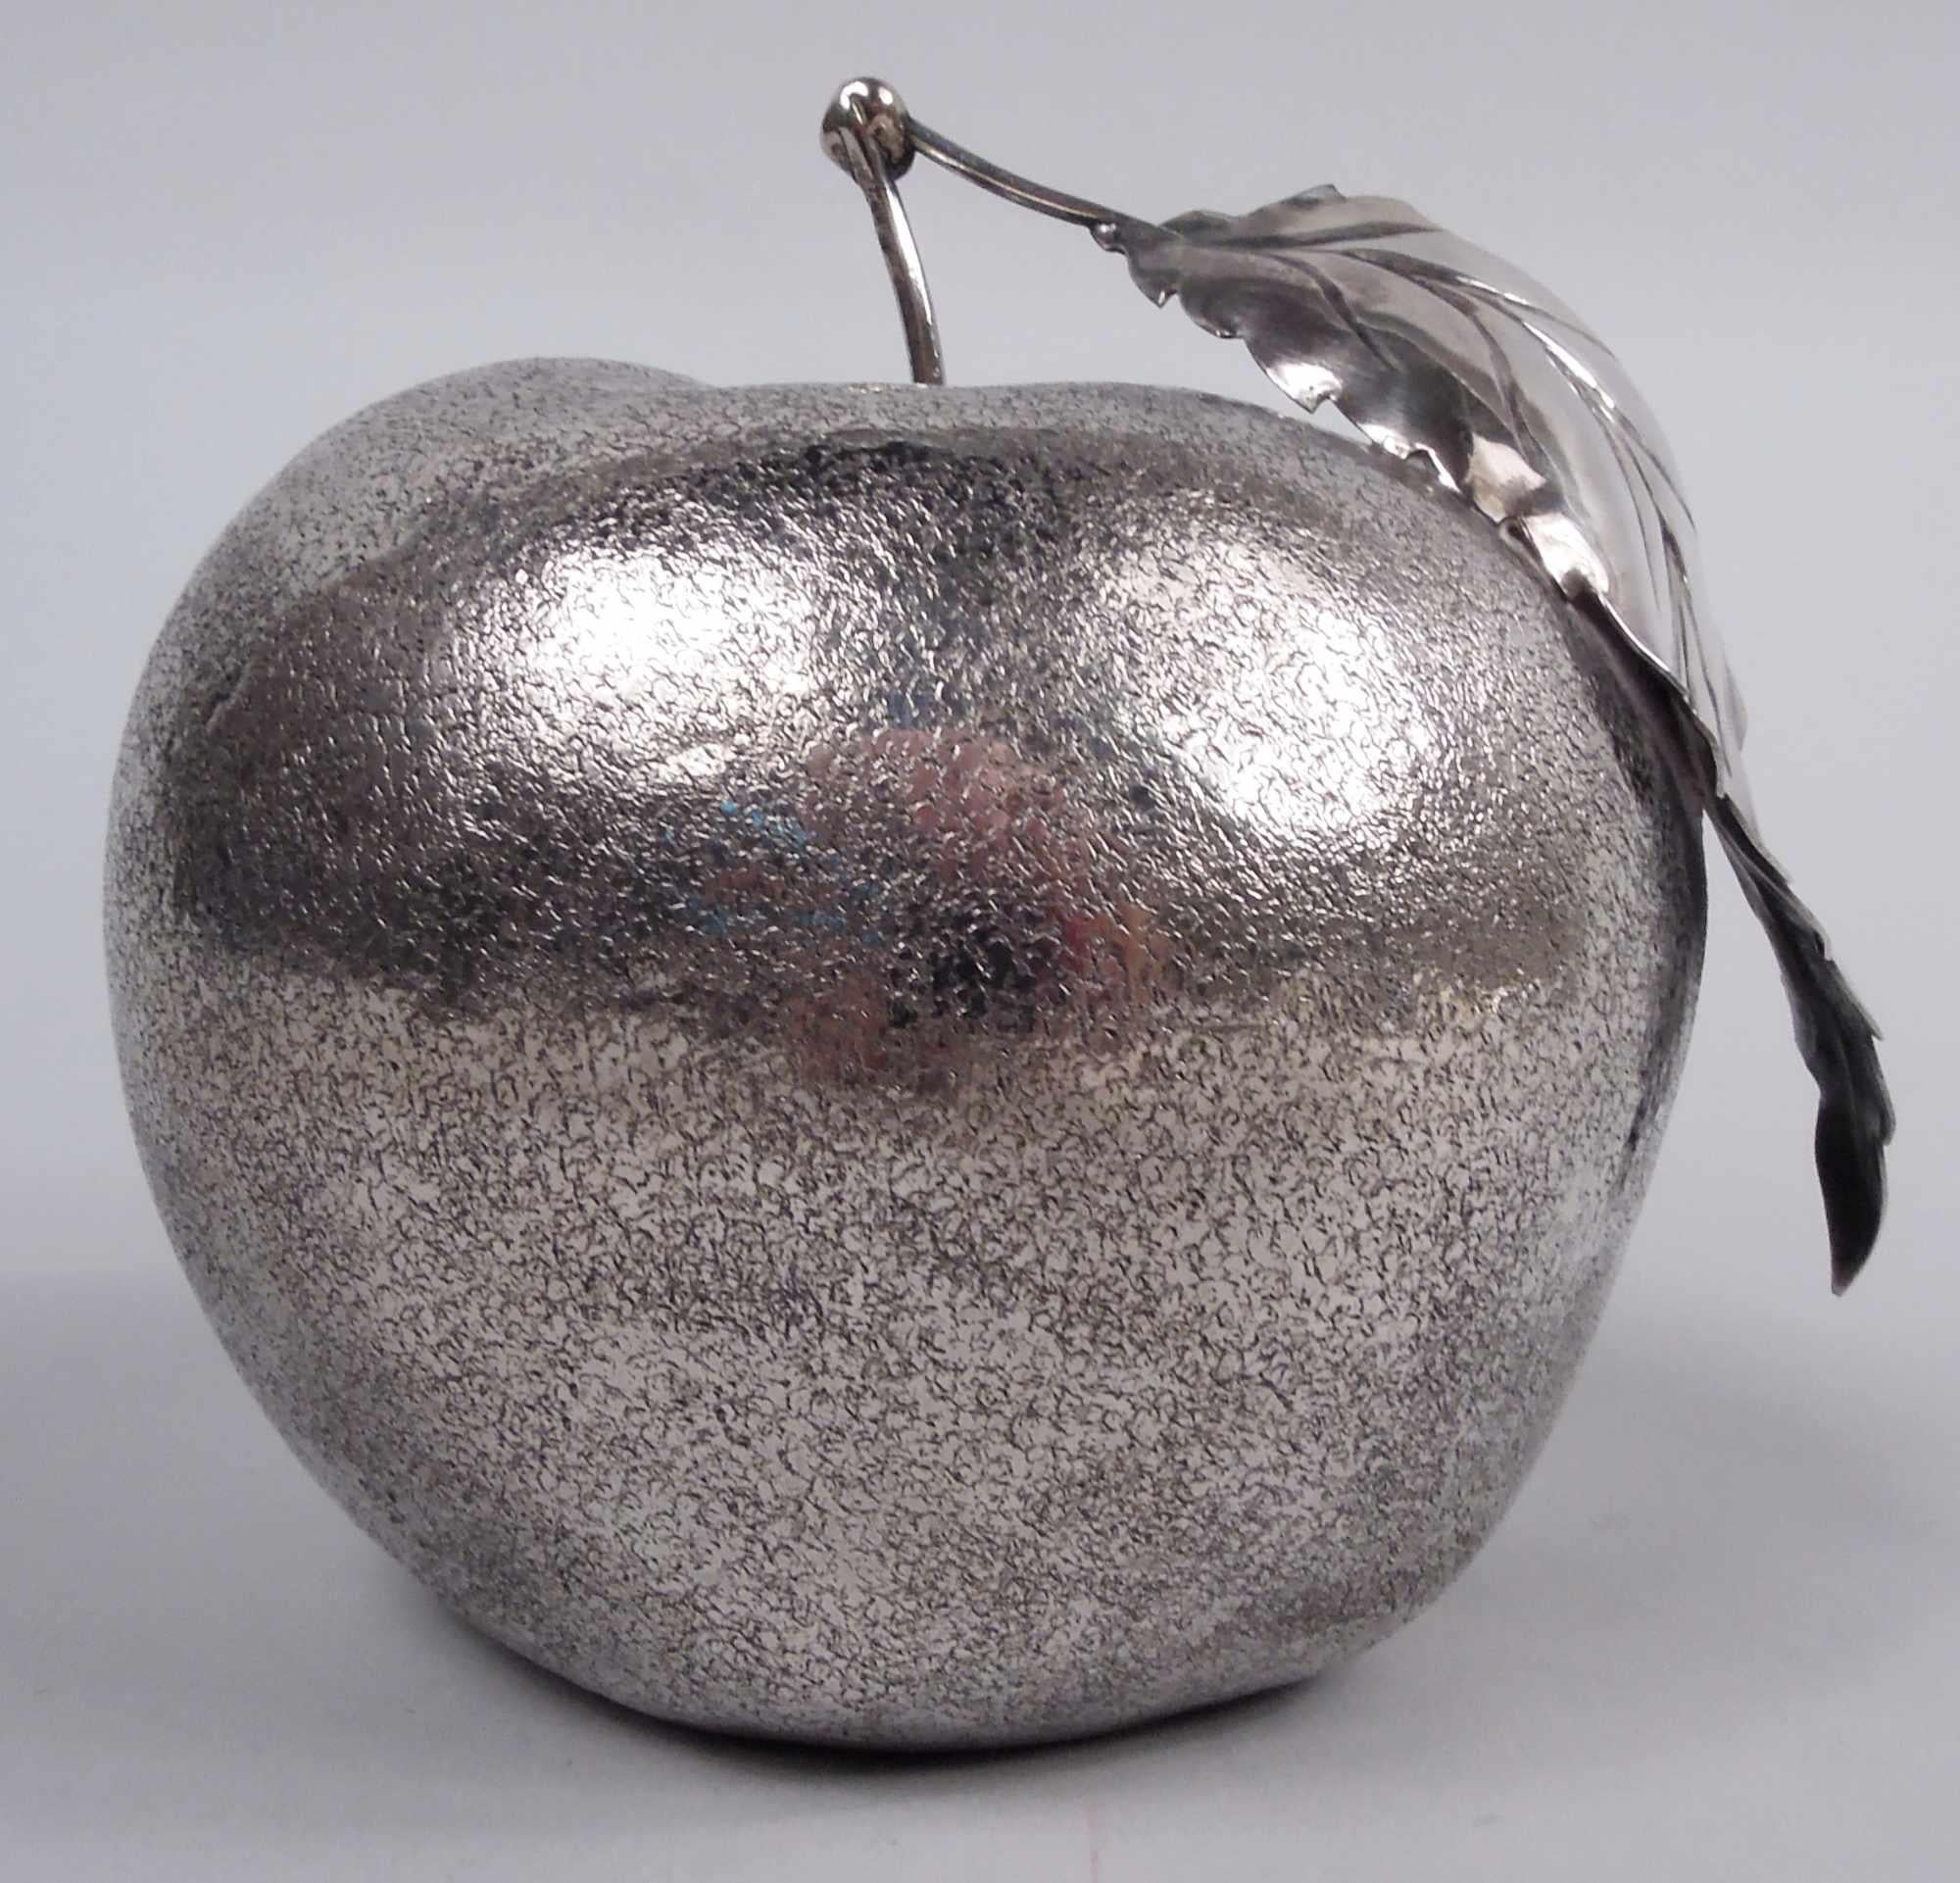 Stylish Italian 800 silver lighter. Large apple with naturalistic irregular form and striated skin. Long stem with leaf. Underside has inset lighter. Italian maker’s mark (1944-68) as well as script Buccellati stamp. Gross weight: 6.3 troy ounces. 